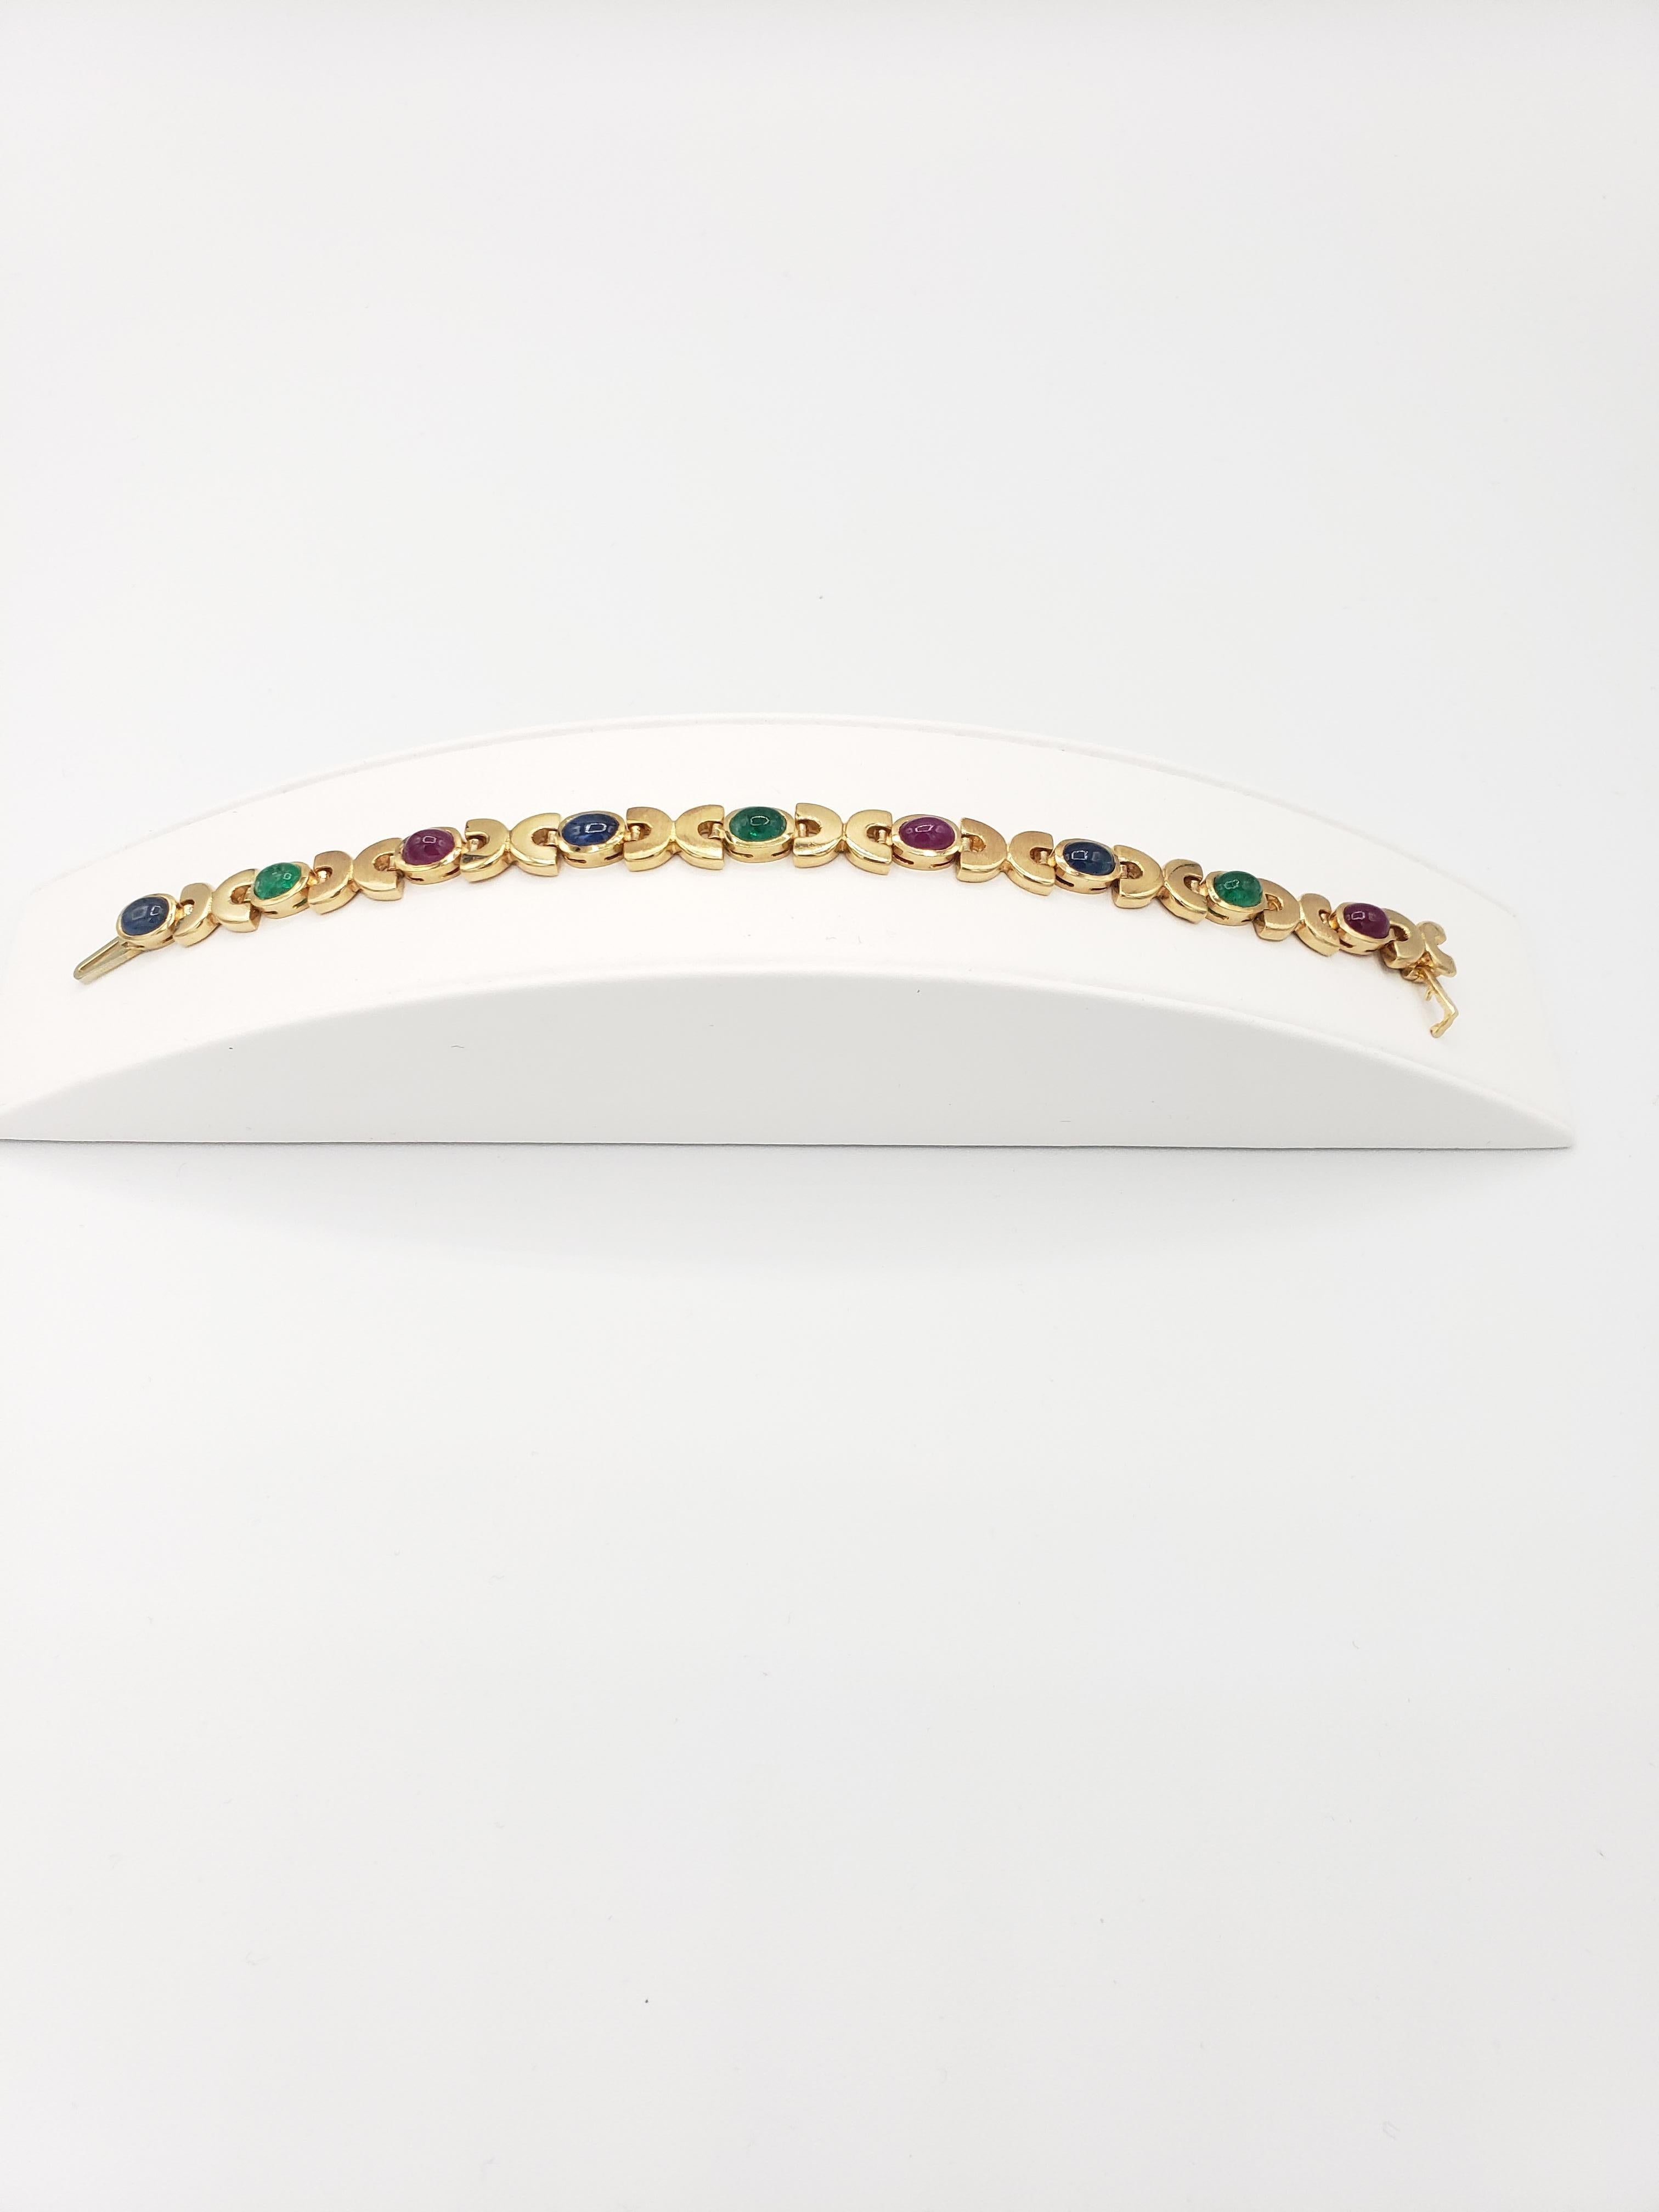 NEW Natural Precious Ruby, Sapphire, Emerald Bracelet in 14k Yellow Gold New For Sale 4